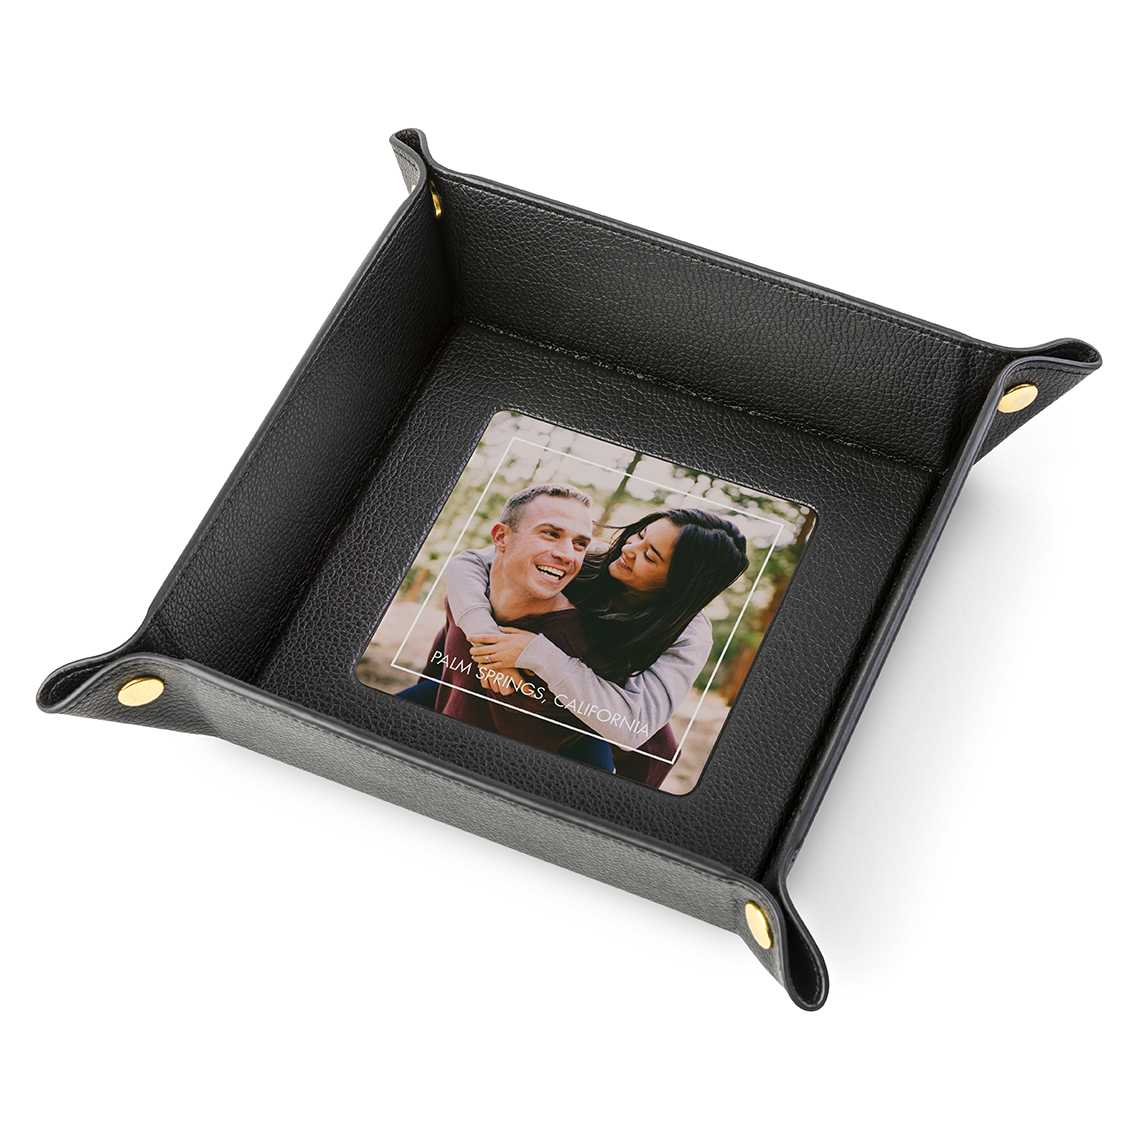 A leather plate with a photo embedded in the bottom.